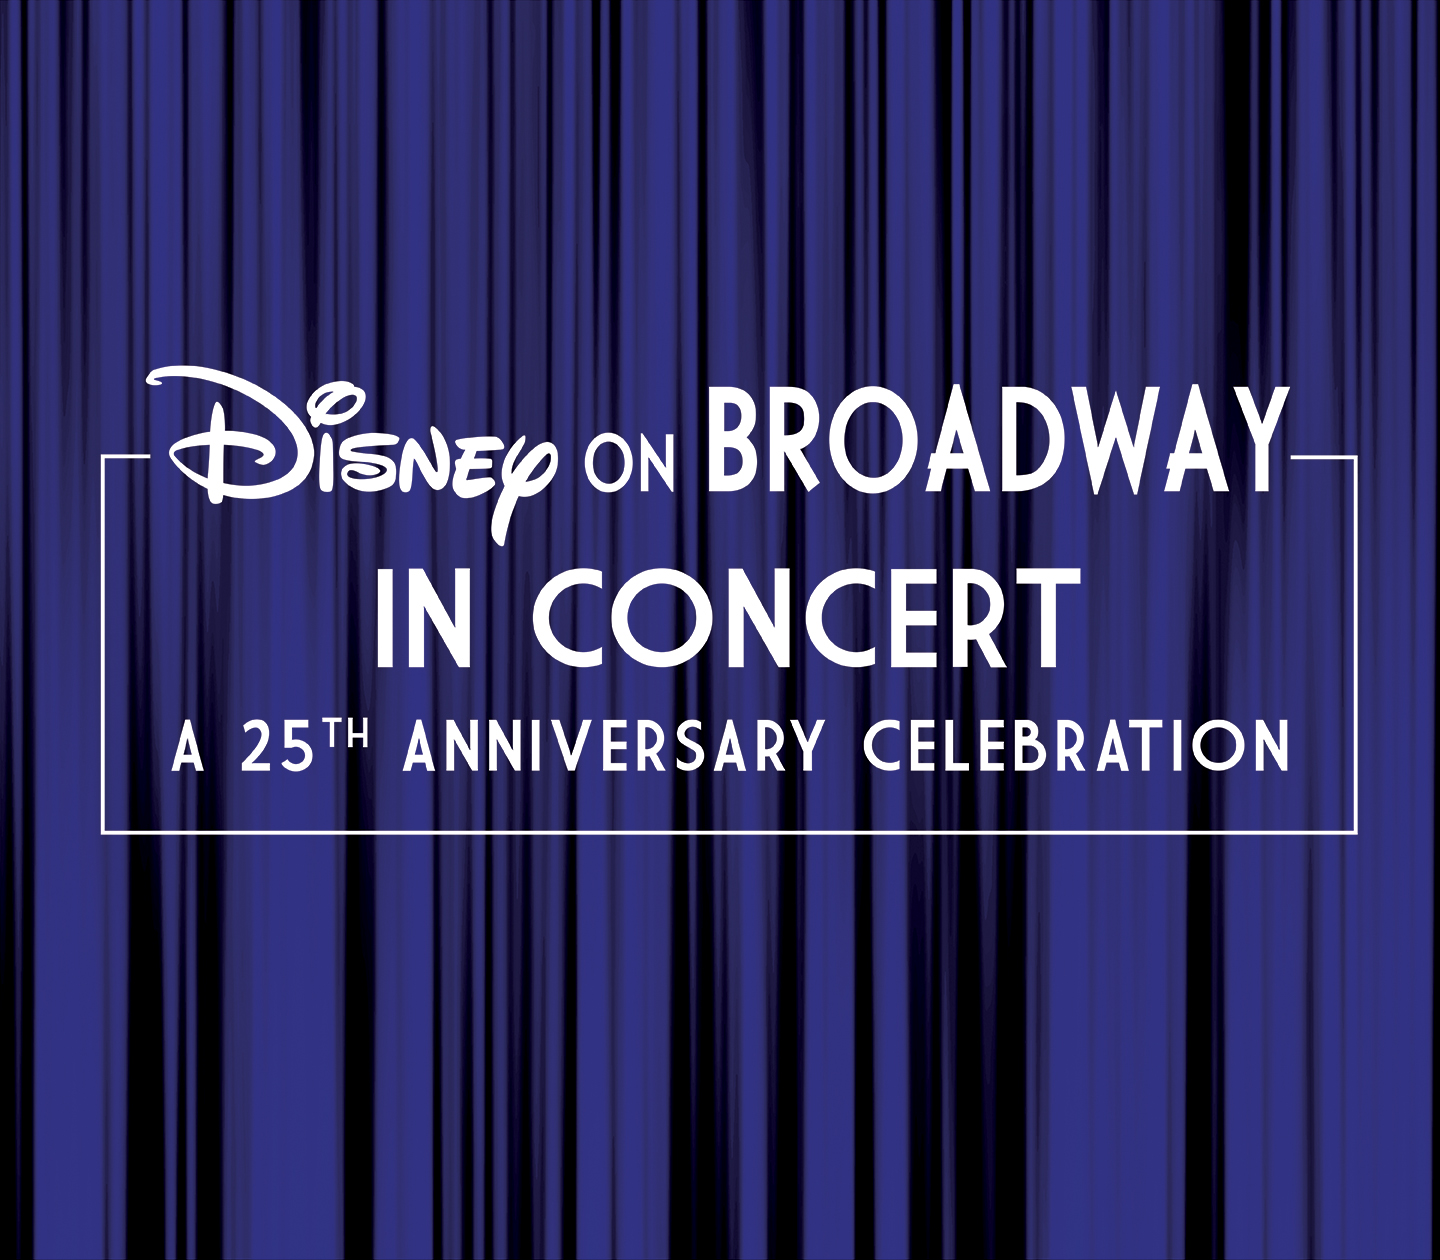 [D23 Expo] Disney on Broadway Celebrates 25th Anniversary in Concert, Premiere of VR Experience